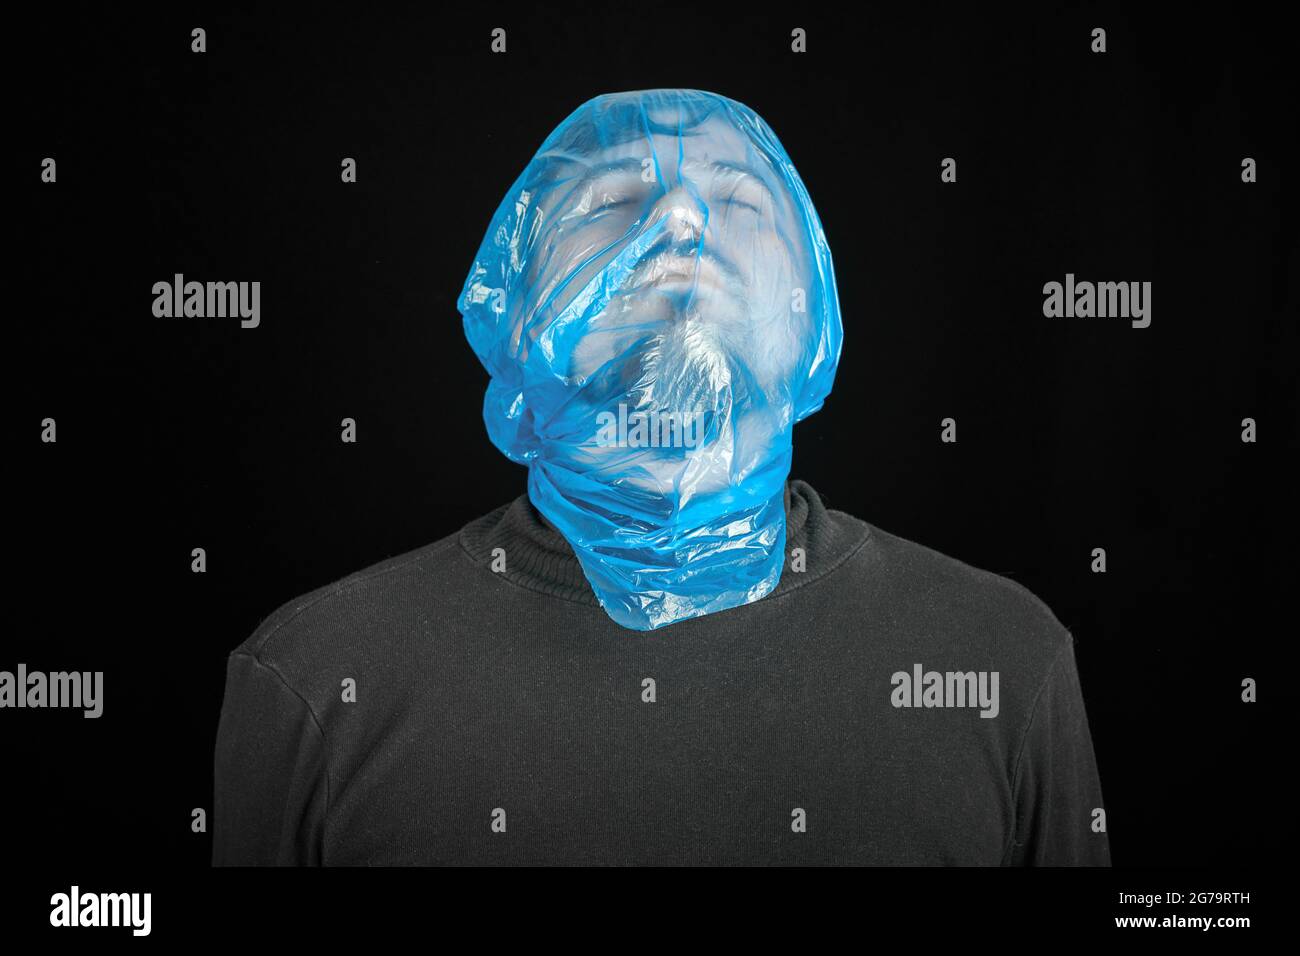 Suicide bag on man head. Exit bag for suicide. Self-asphyxiation concept. Garbage bag on head. Shortness of breath, lack of air. Black background. Stock Photo